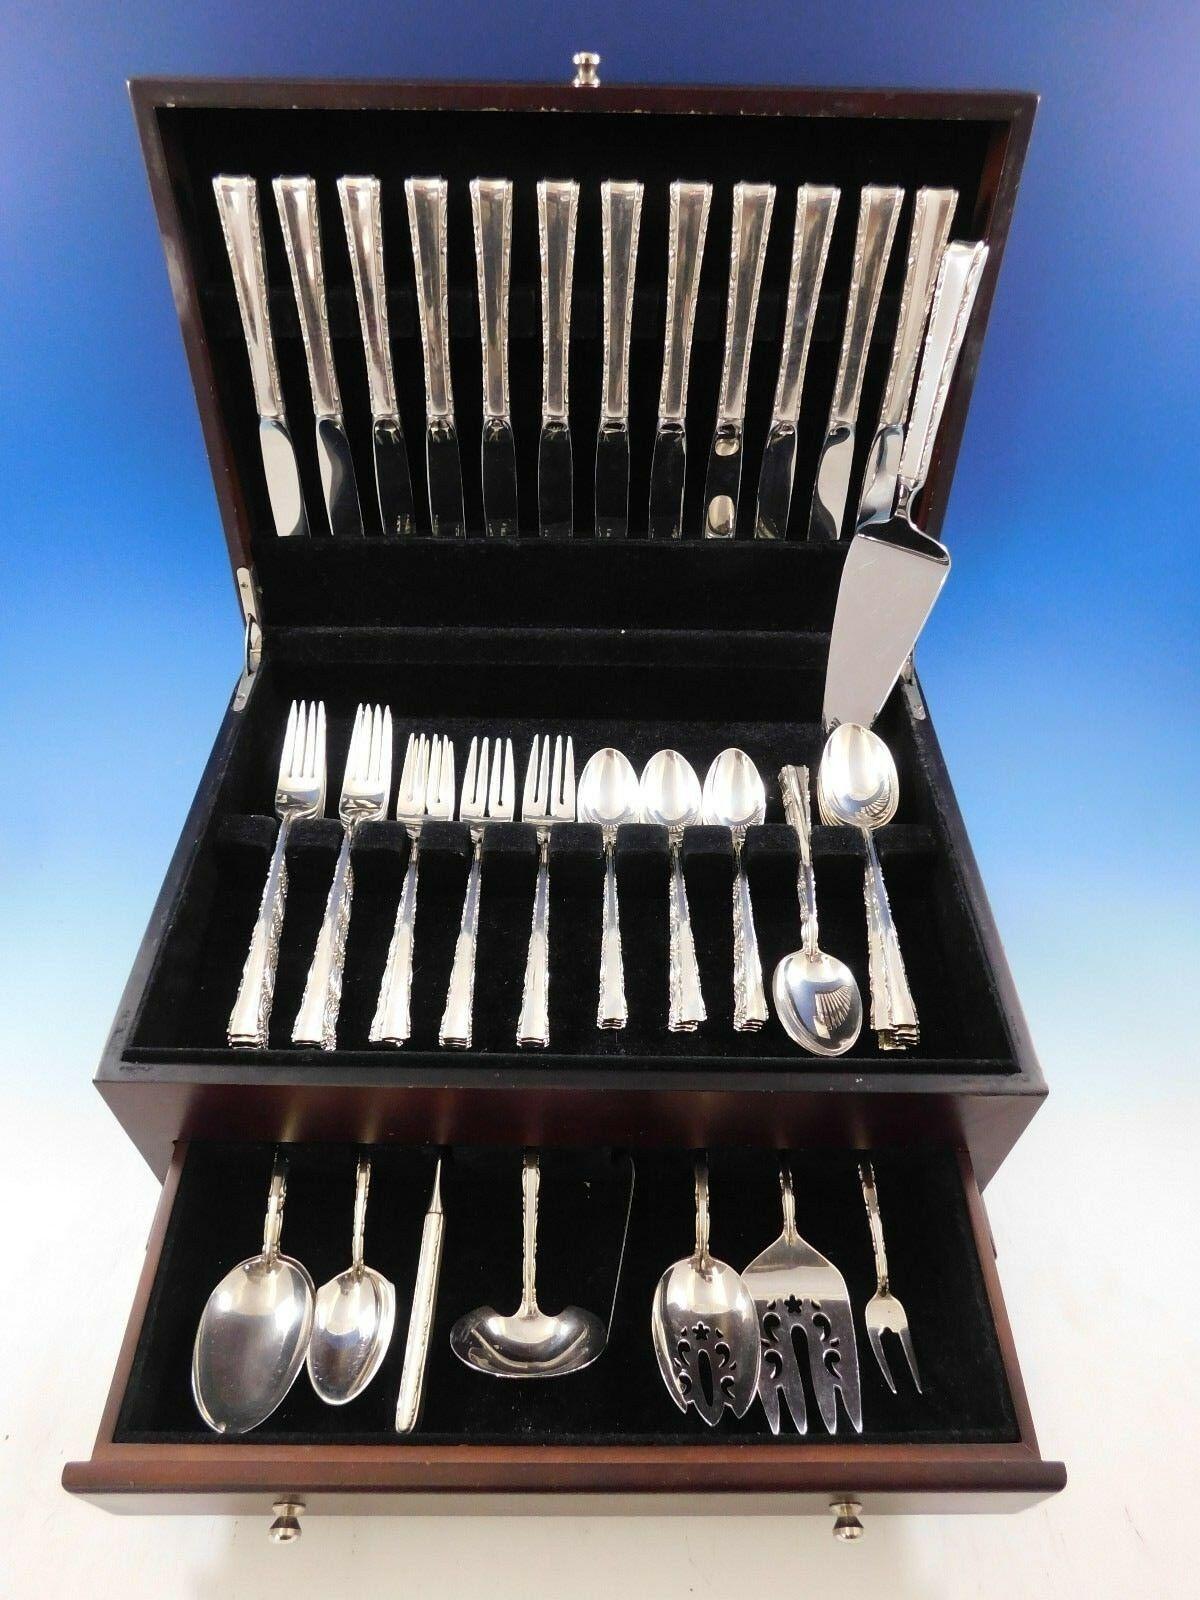 Madrigal by Lunt sterling silver flatware set of 63 pieces, in excellent condition.This set includes:

12 knives, 9